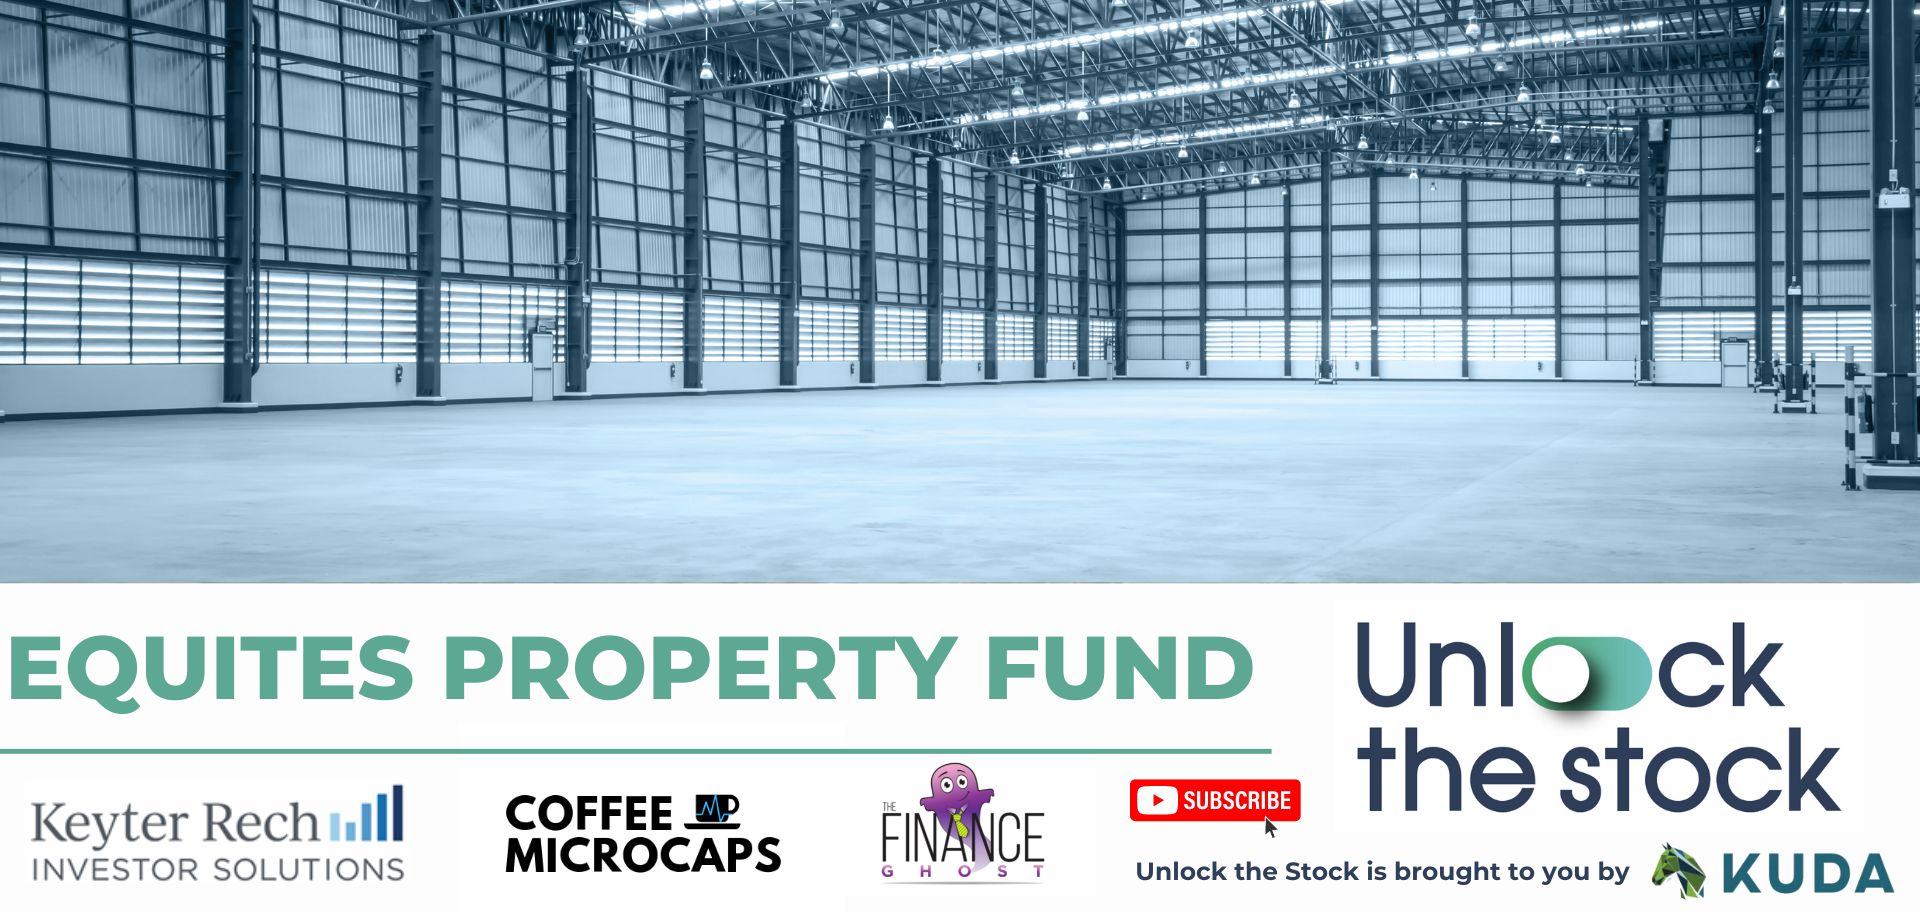 Unlock the Stock: Equites Property Fund